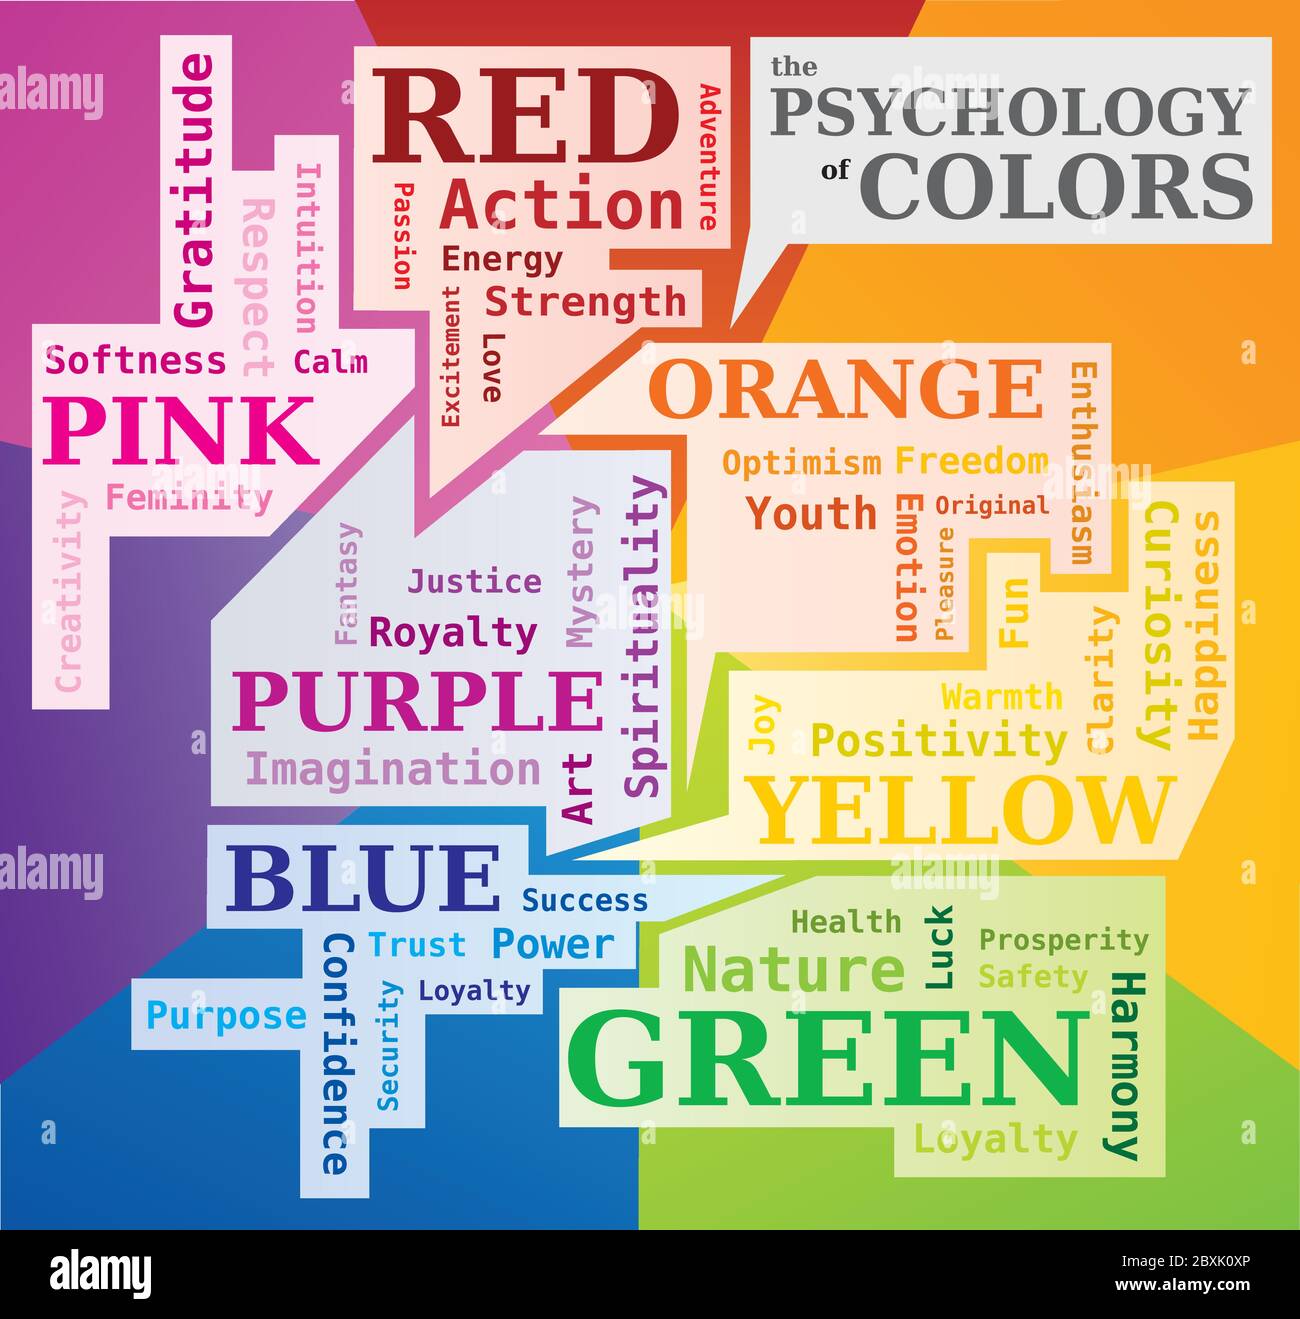 The Psychology of Colors Word Cloud showing the Meaning of Colors - English Stock Vector